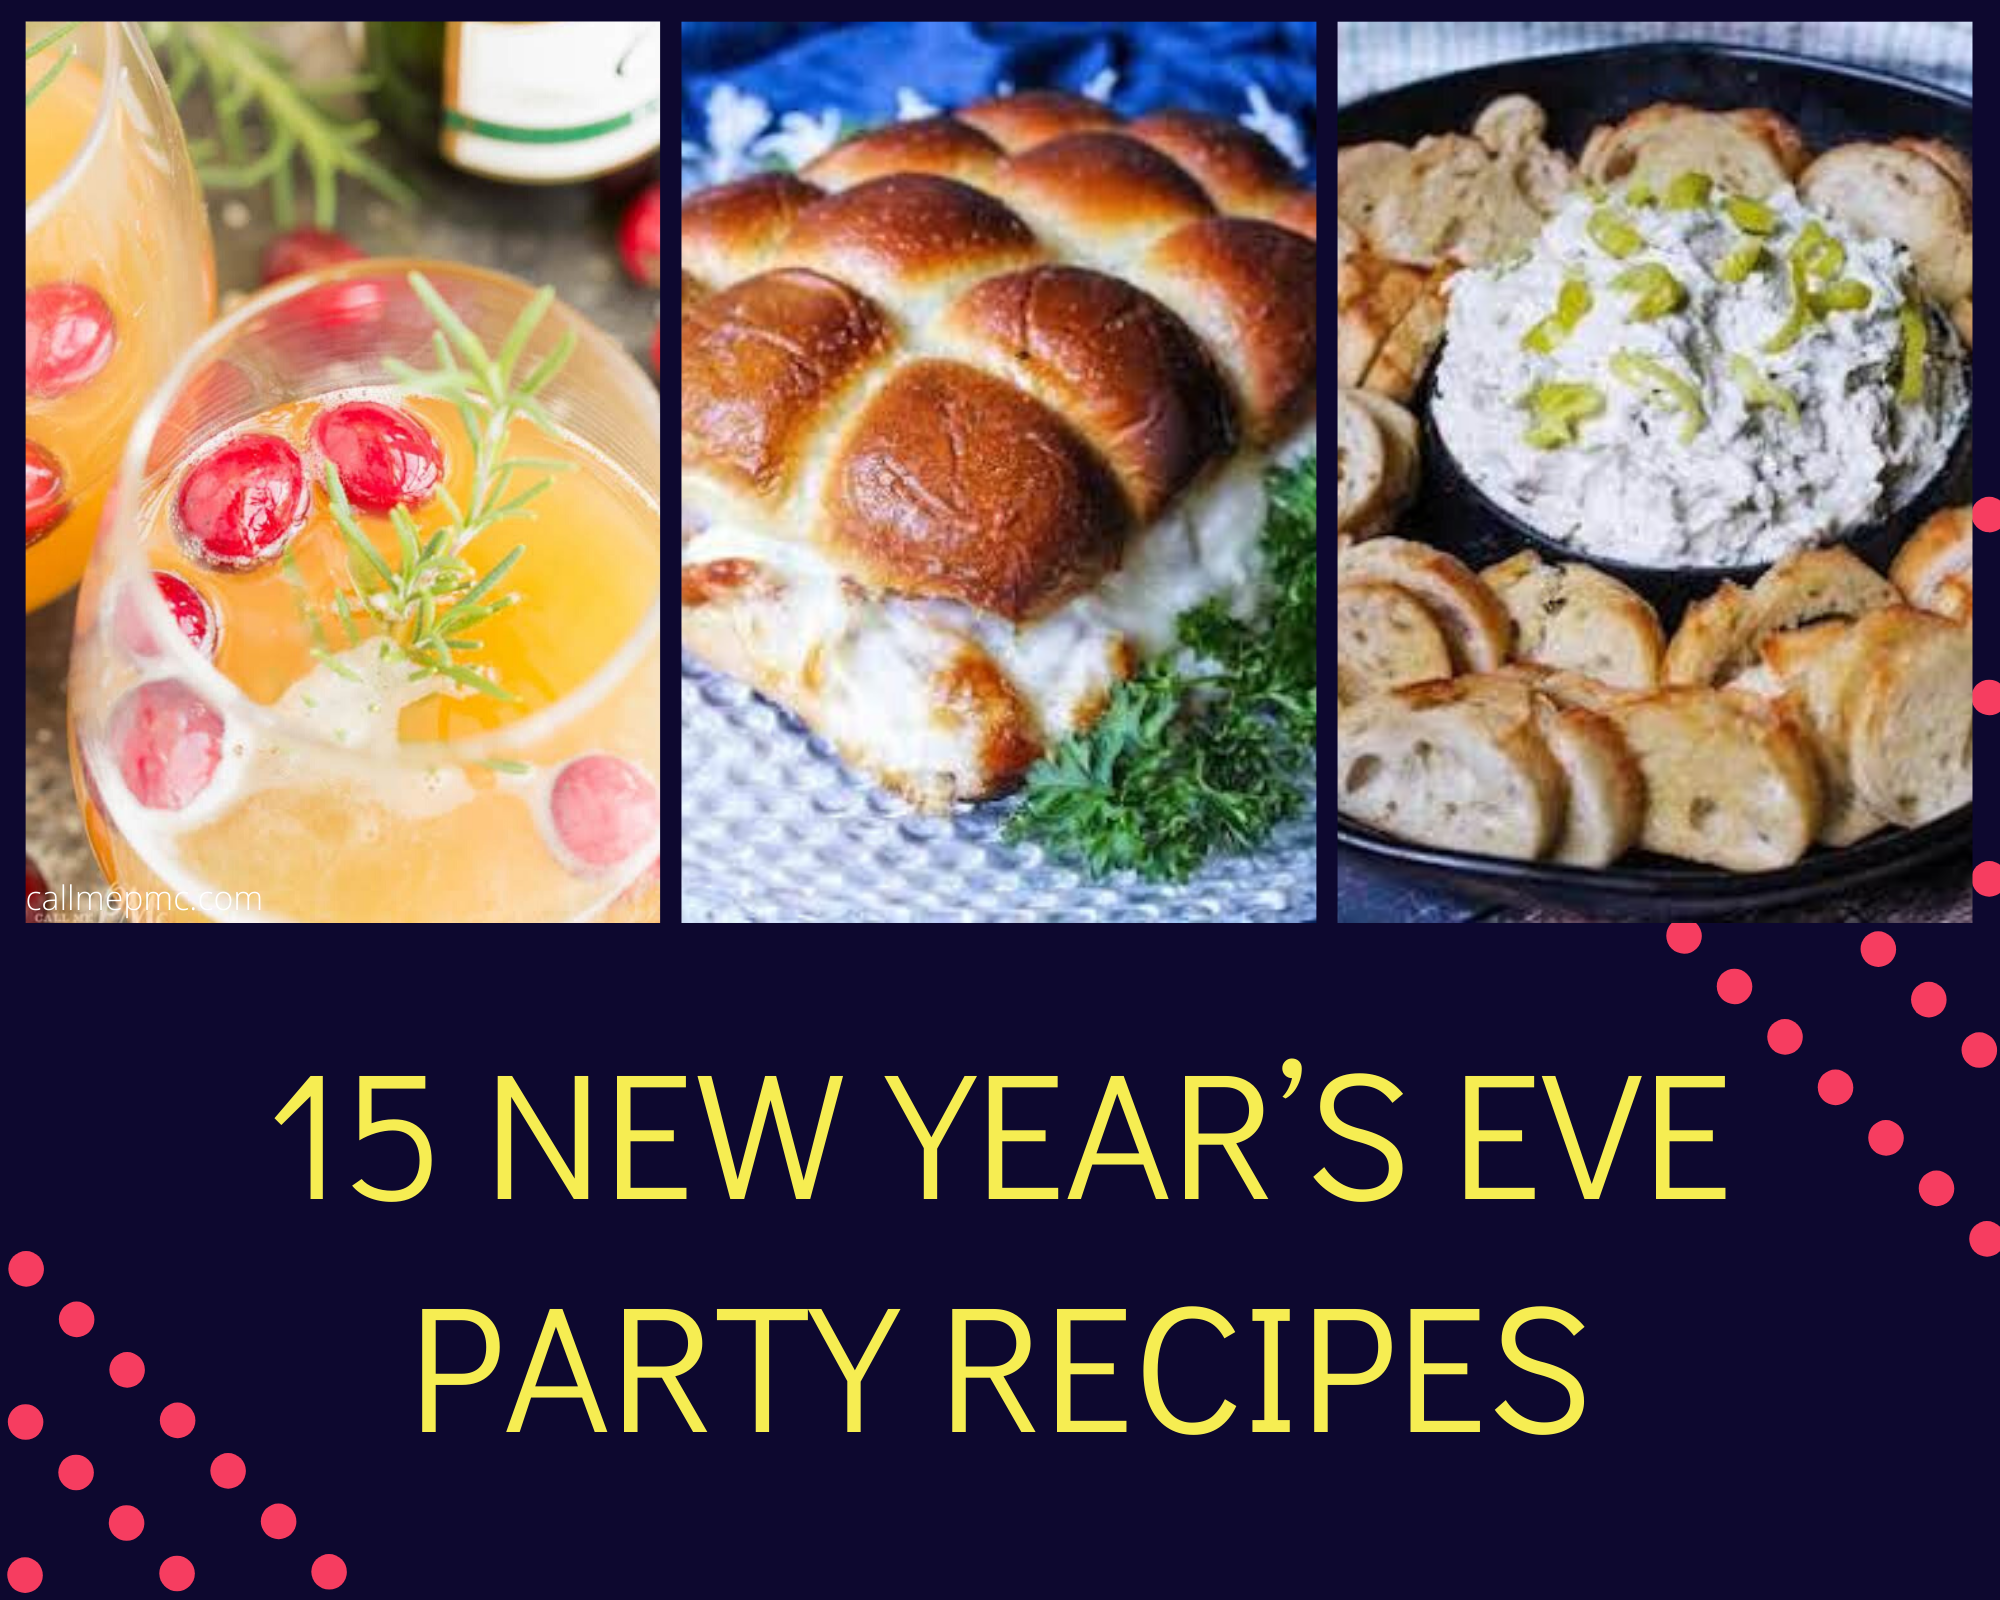 15 New Year’s Eve Party Recipes